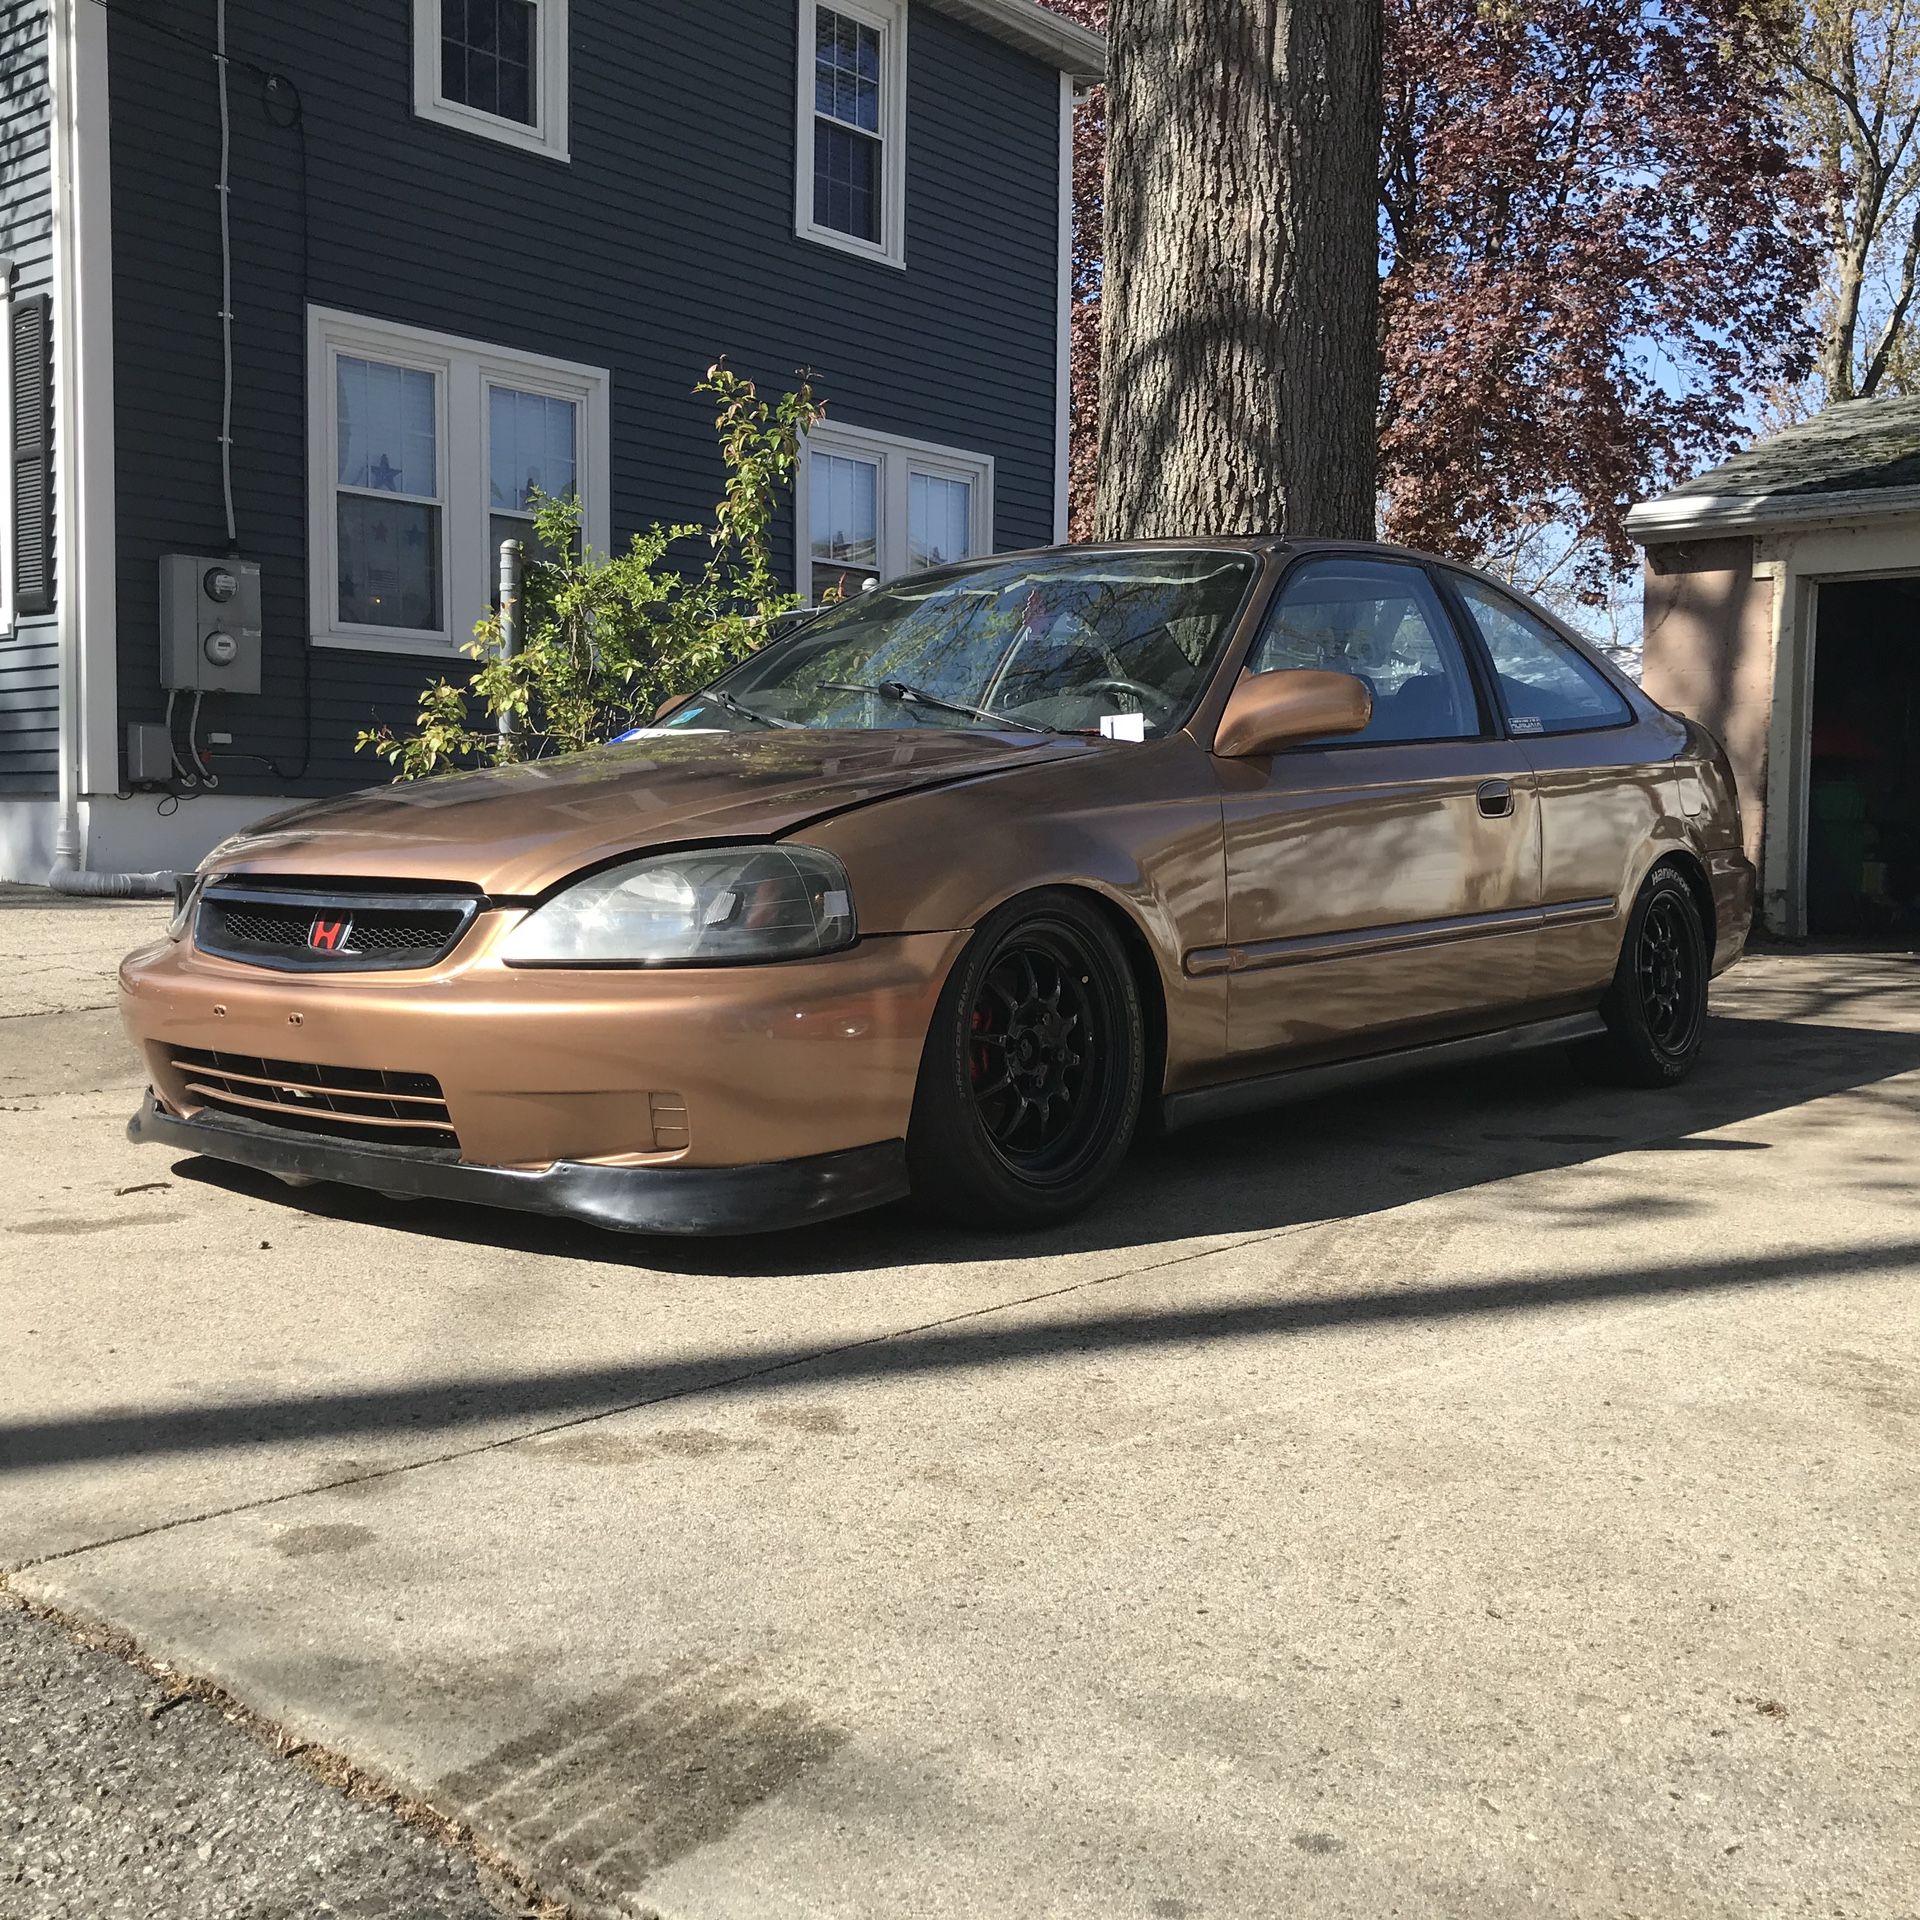 CLEANEST COUPE EVER 1998 Honda Civic ex coupe Aka THE GOLD COUPE